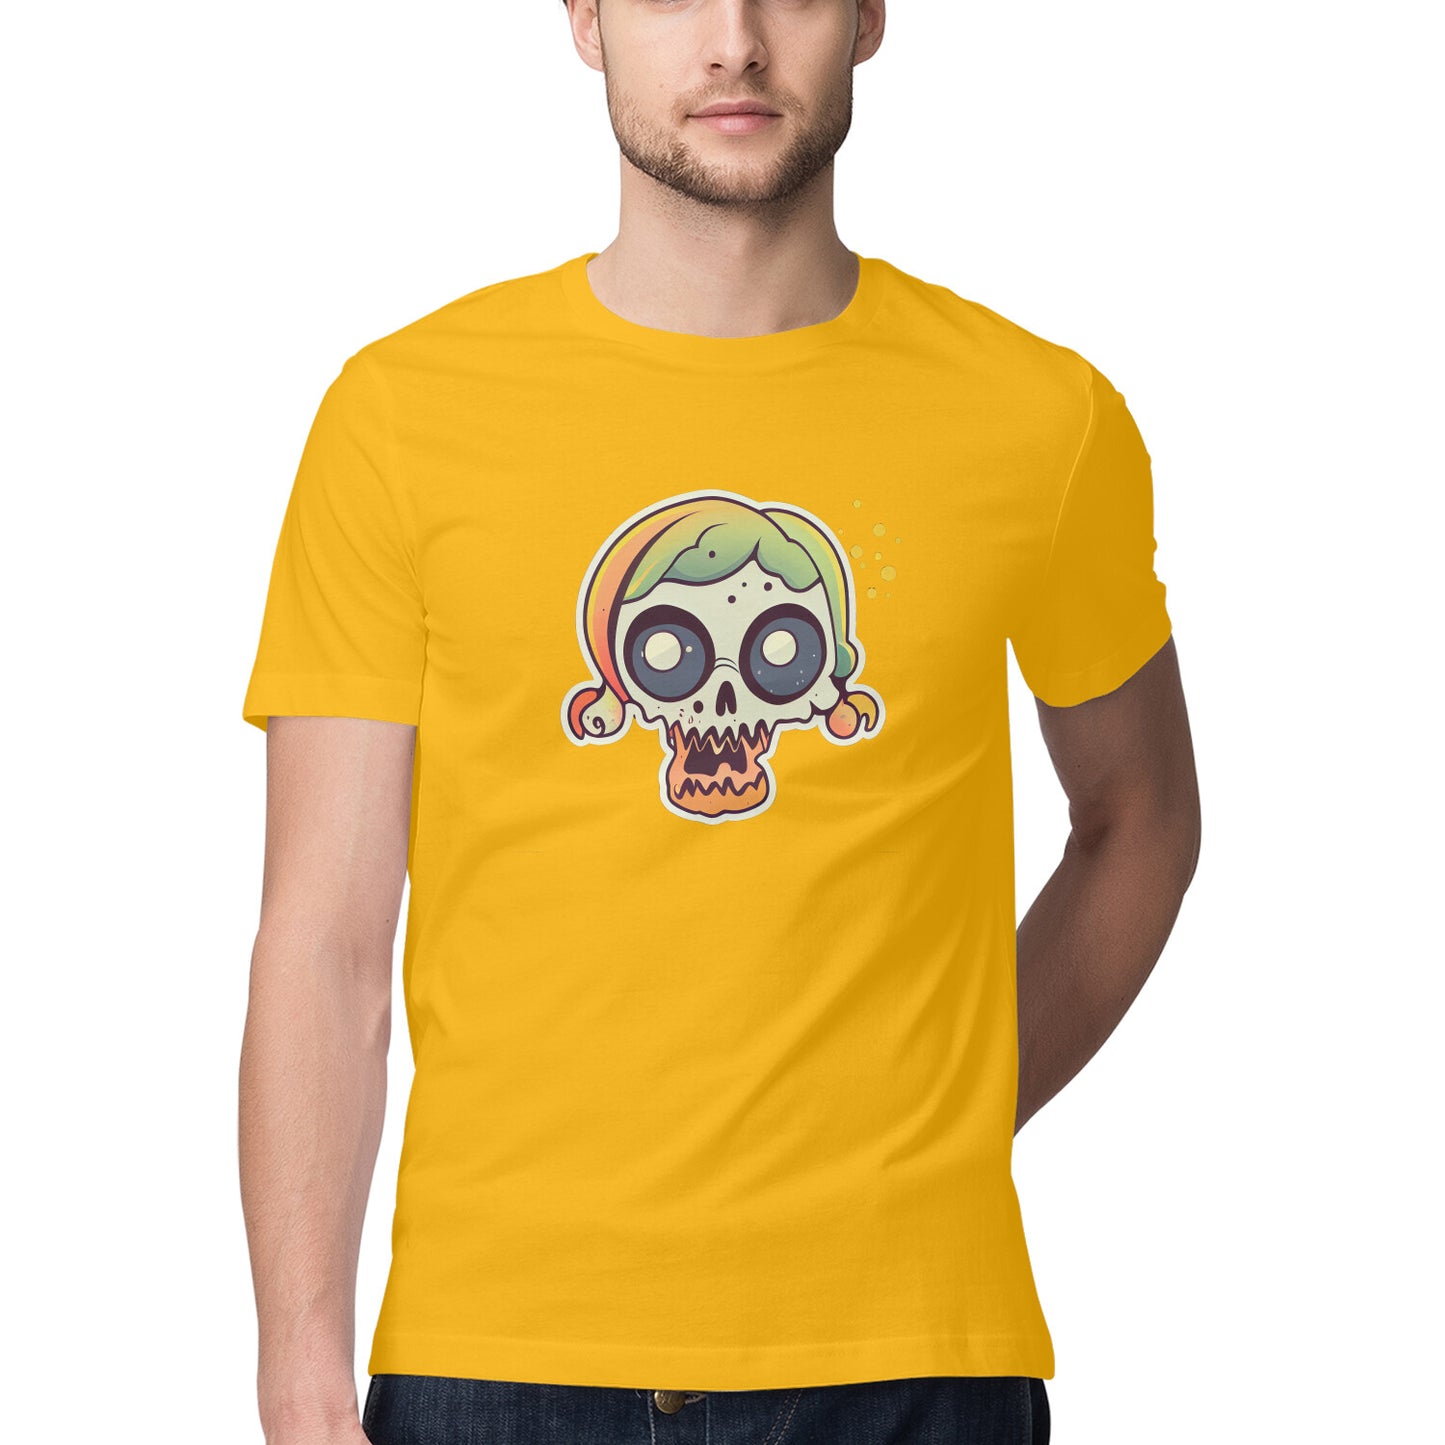 Zombies and monsters Design 29 Printed Graphic T-Shirt